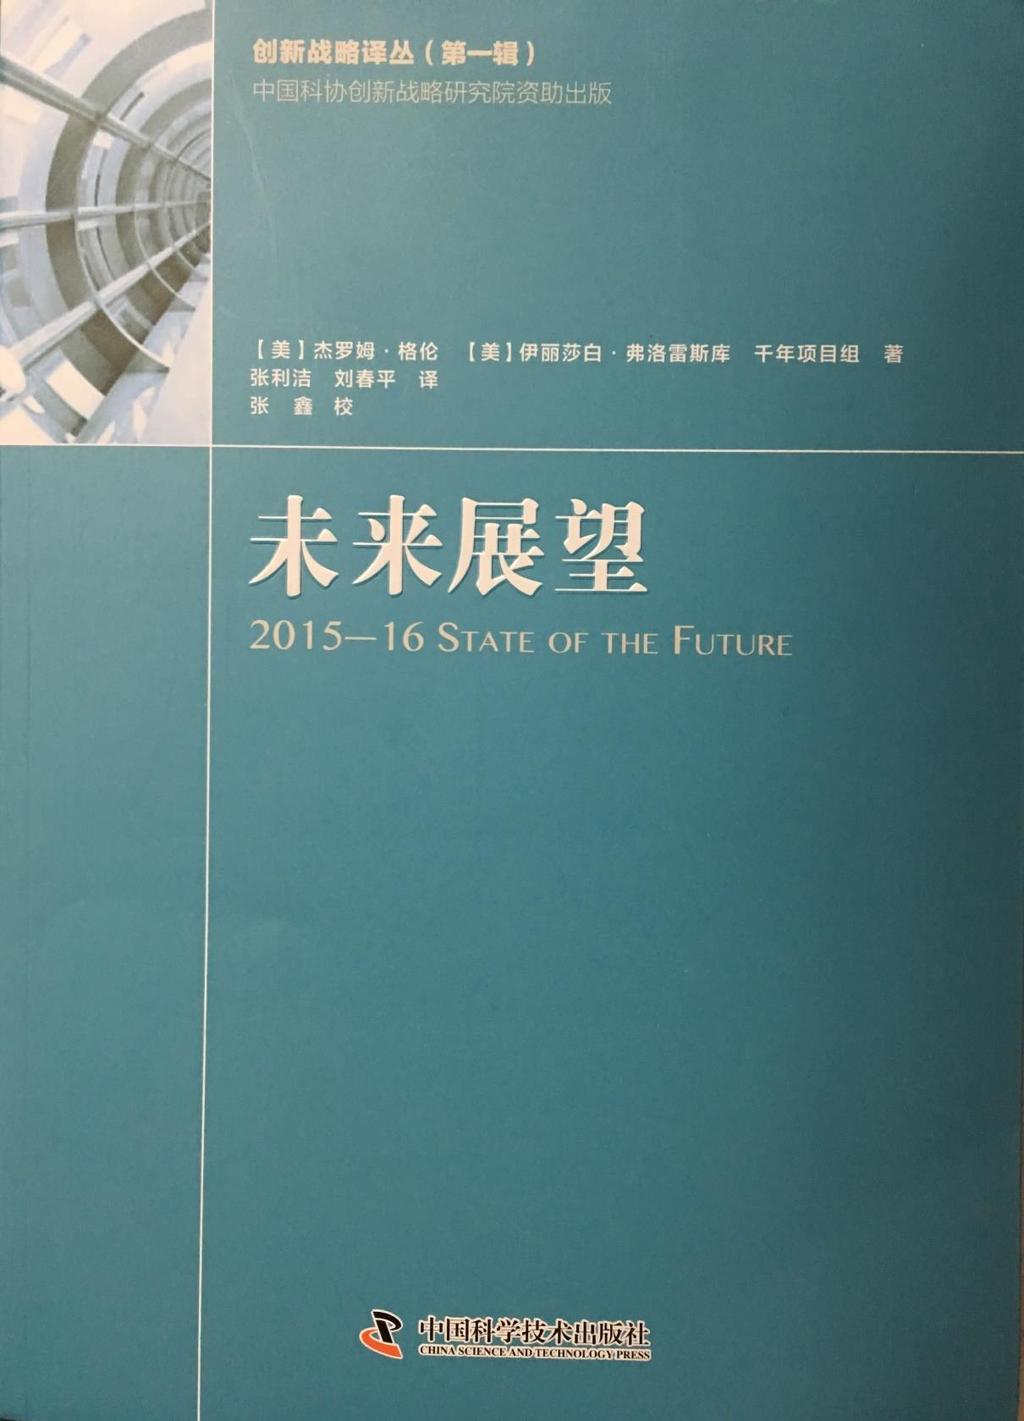 The Chinese government used to publish it, but did not promote it; the private sector will